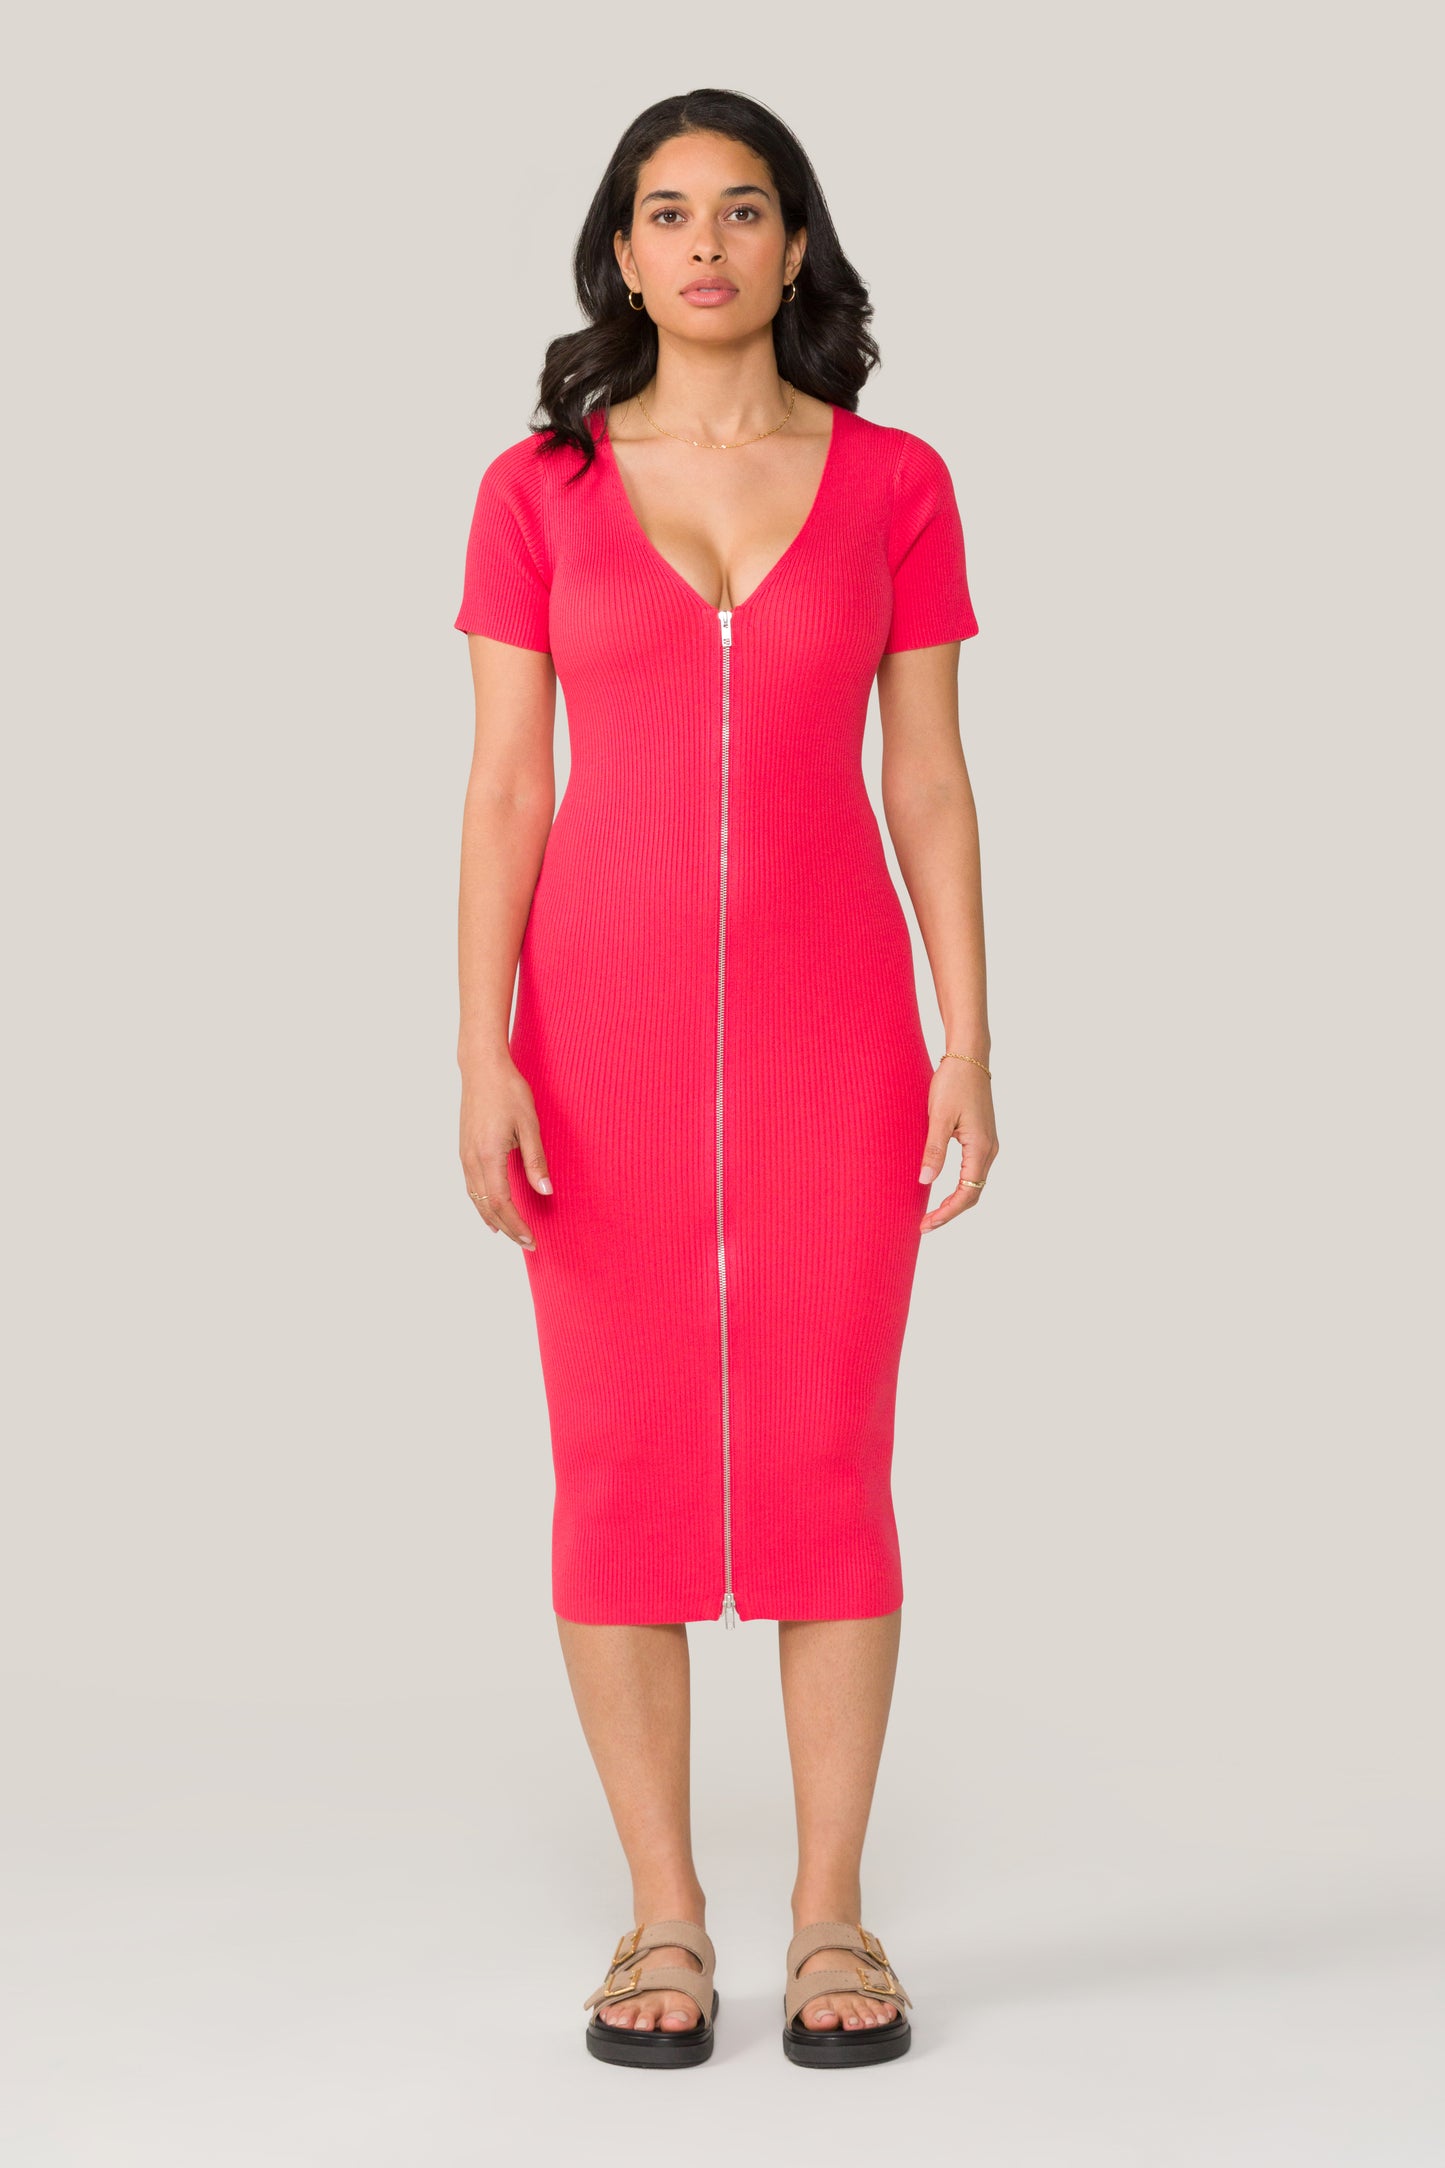 Alala women's knit dress with full-length zipper in coral